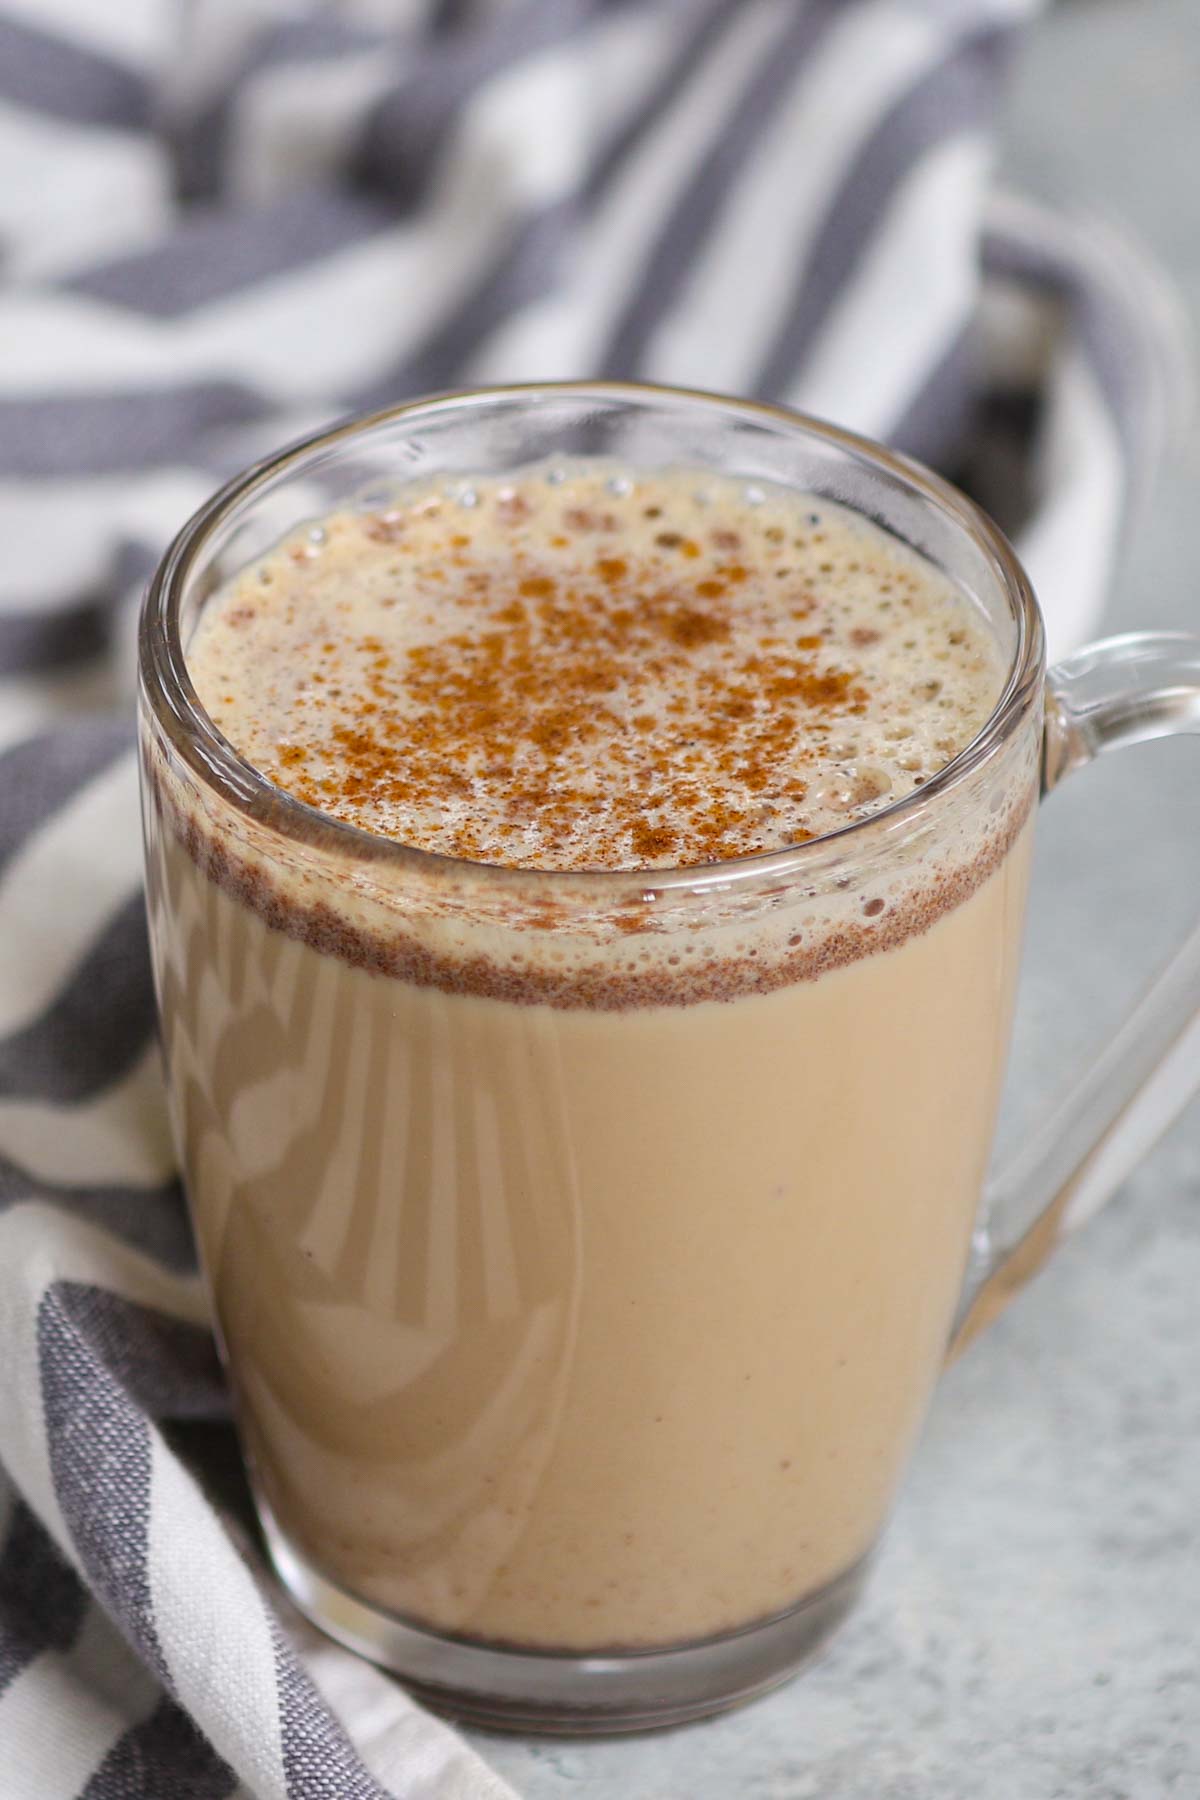 This homemade Starbucks copycat Chai Tea Latte gives you all the delicious flavor of the store-bought drink at the fraction of the price. It’s a caffeinated latte that makes the perfect warm drink on a cool day, and equally as good iced too. You can now save money and make this easy recipe at home with a few simple ingredients. 